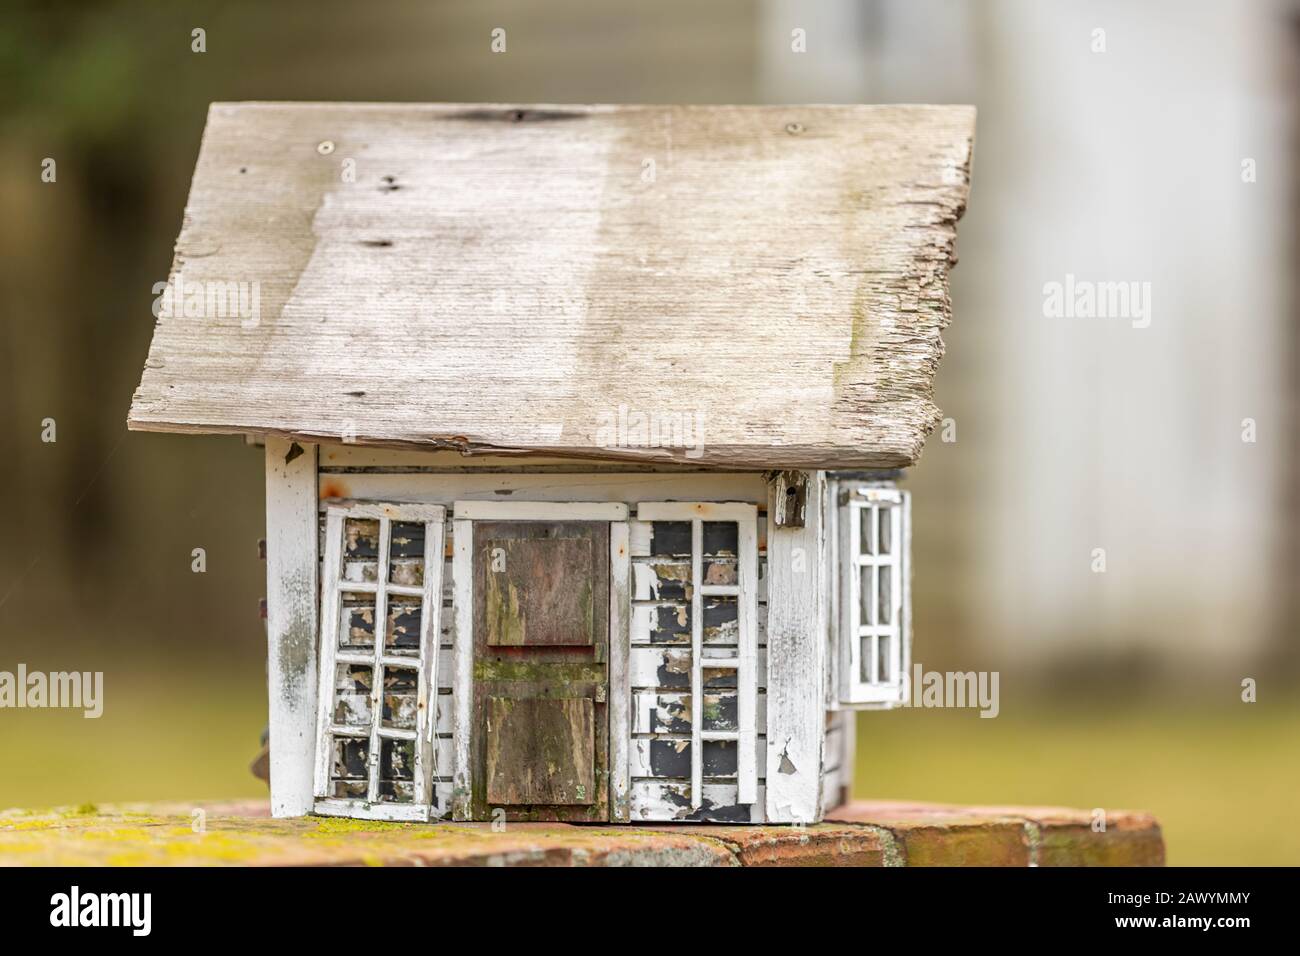 an old bird house in disrepair Stock Photo